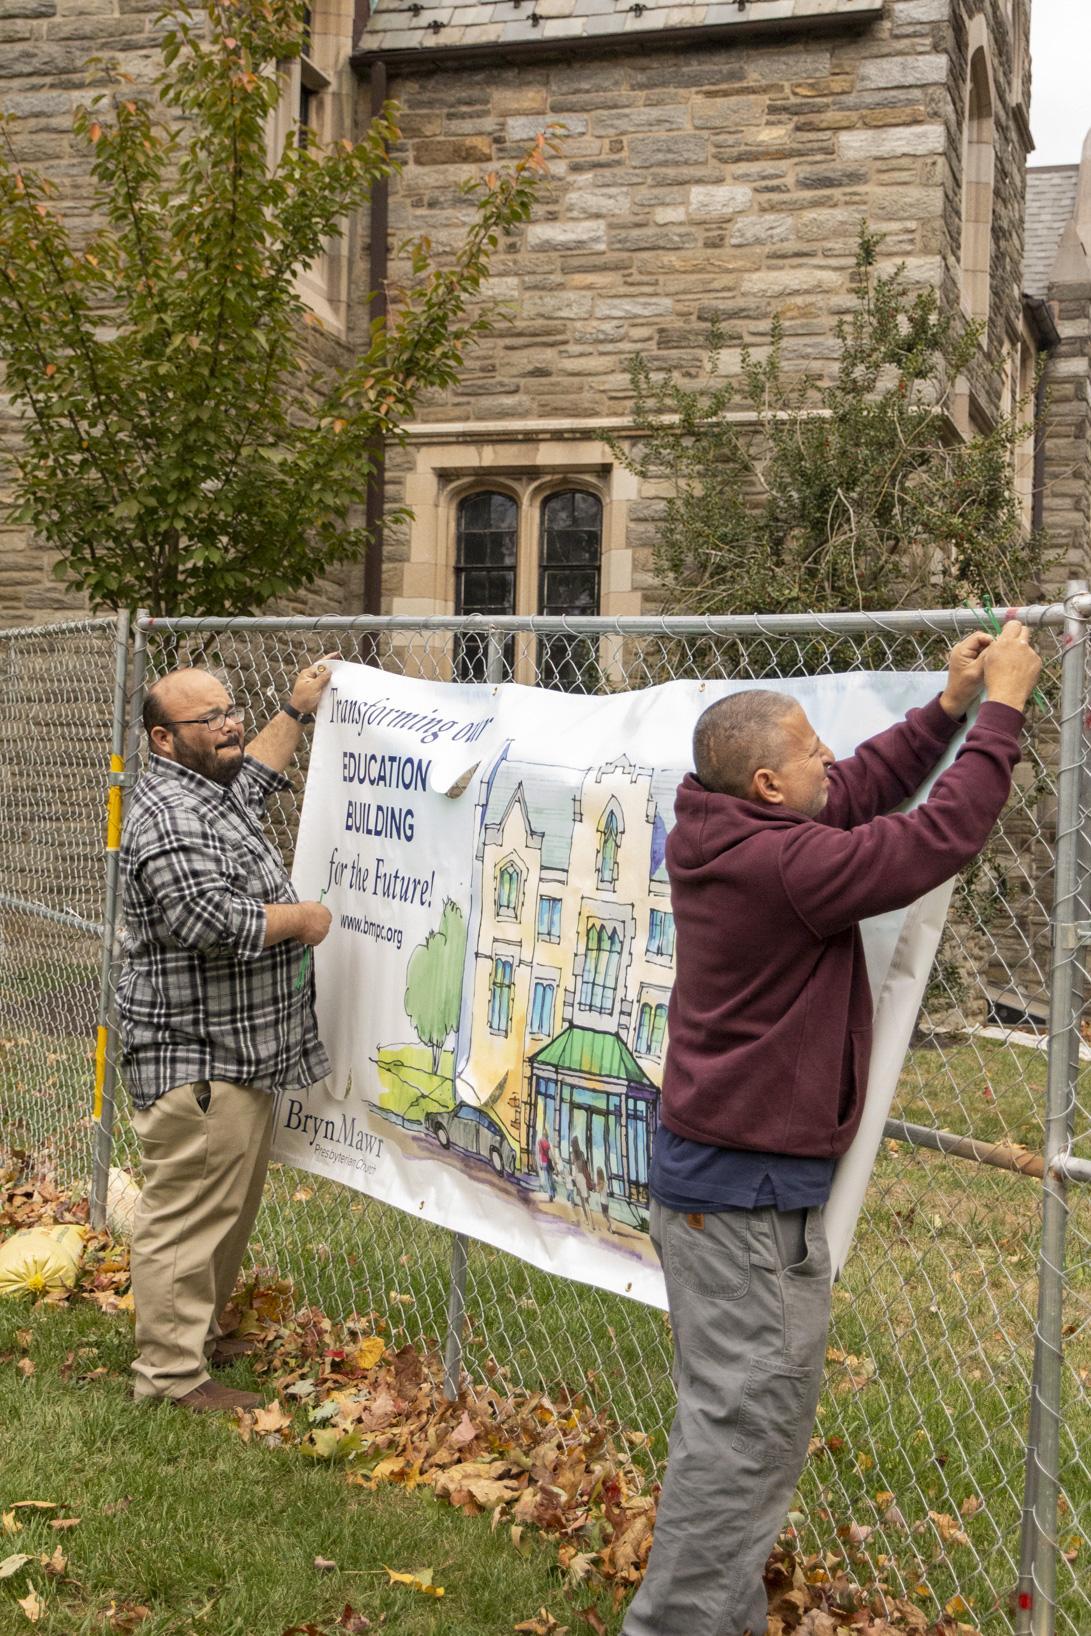 Rich and Howard hang a banner on the fence.